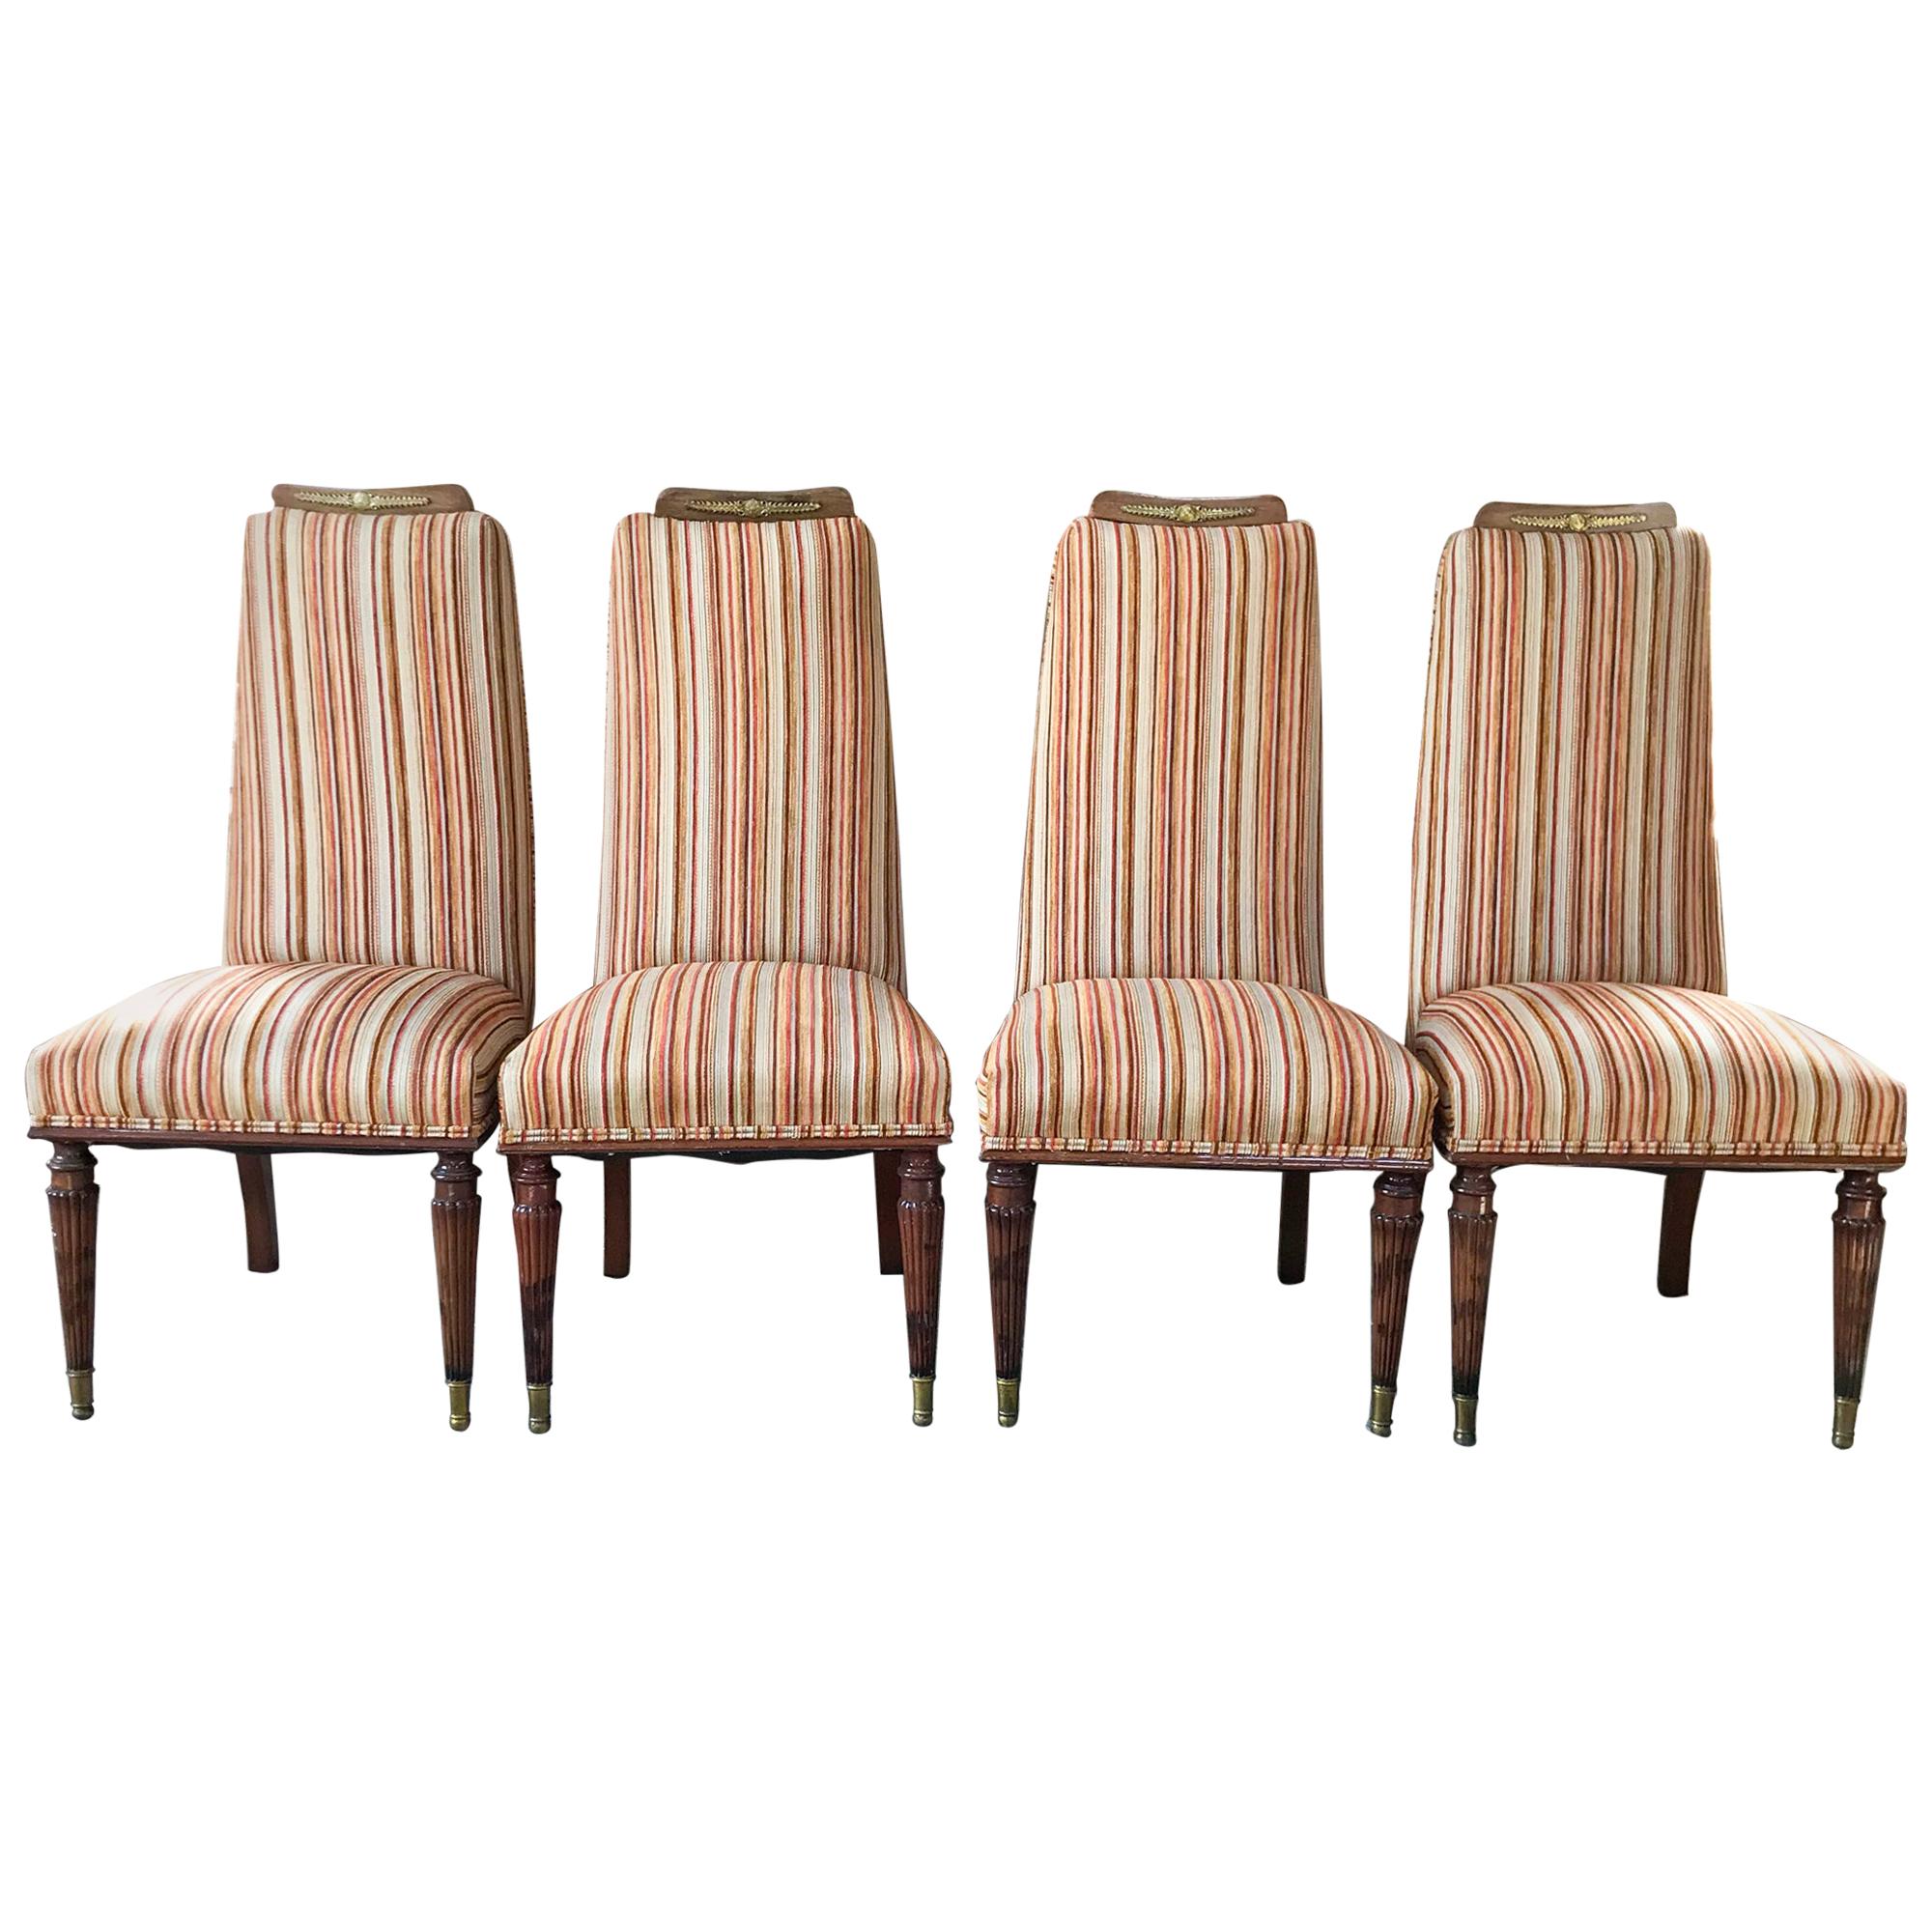 Dining Chairs
Set of 4 Italian Dining Chairs attributed to Vittorio Dassi, Italian Design circa 1950s.
Unmarked.
Warm and Elegant Midcentury Italian Dining Chairs Neoclassical Relief Ornamentation with sculptural brass capped legs. 
Lovely rich wood